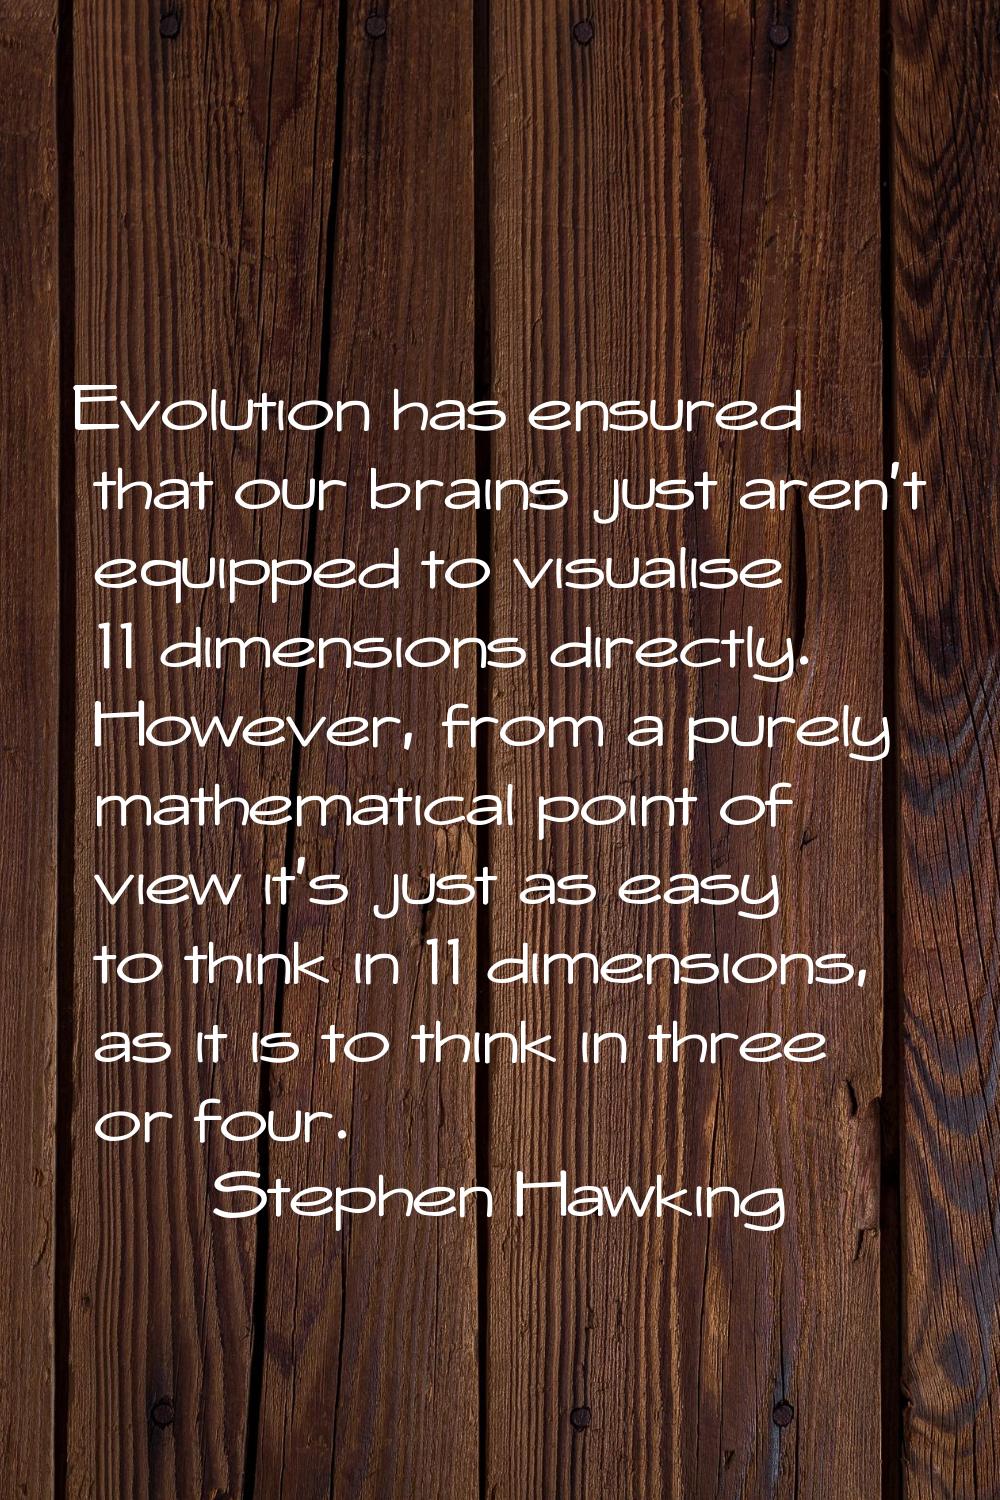 Evolution has ensured that our brains just aren't equipped to visualise 11 dimensions directly. How